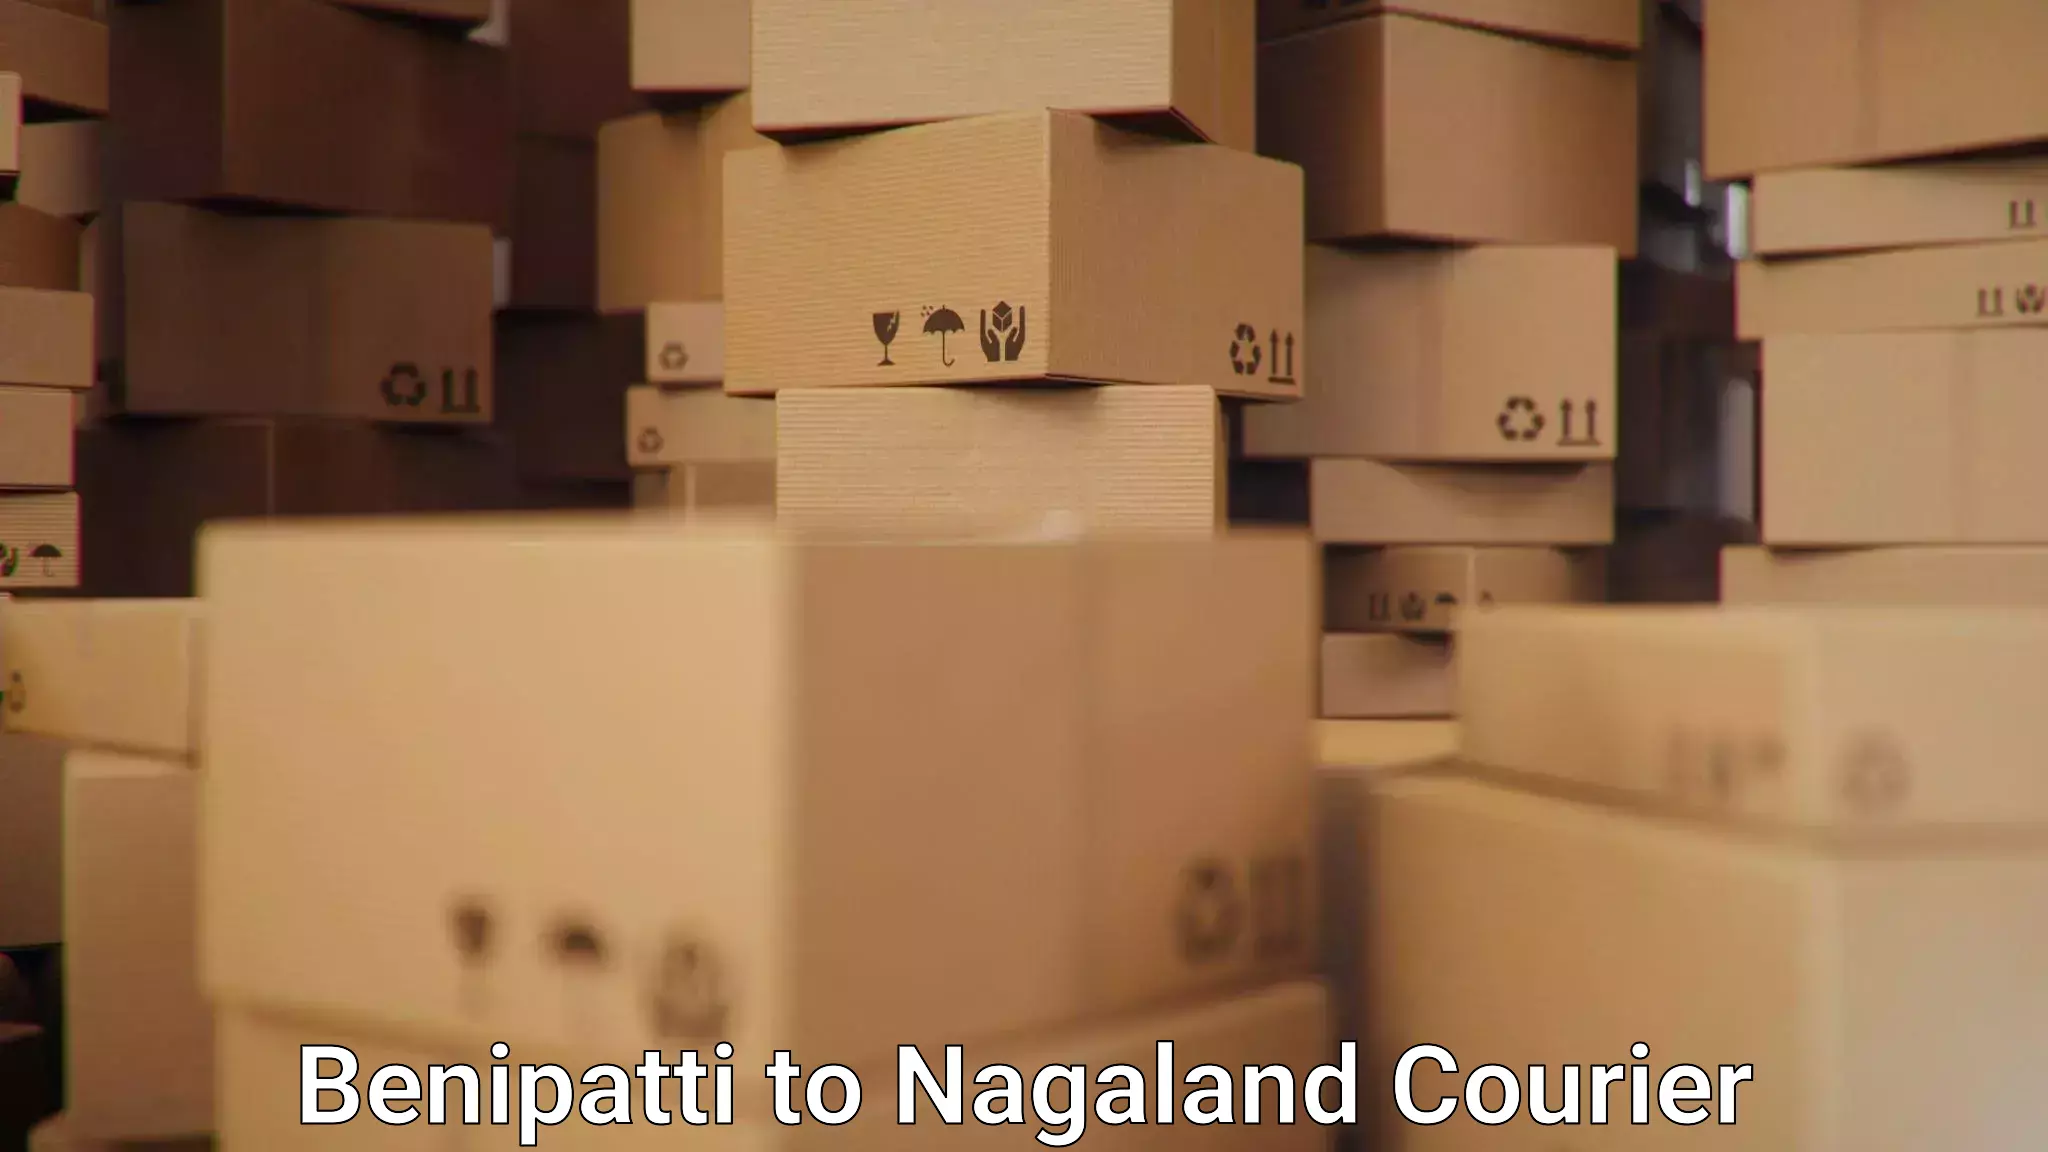 Express delivery network Benipatti to Nagaland